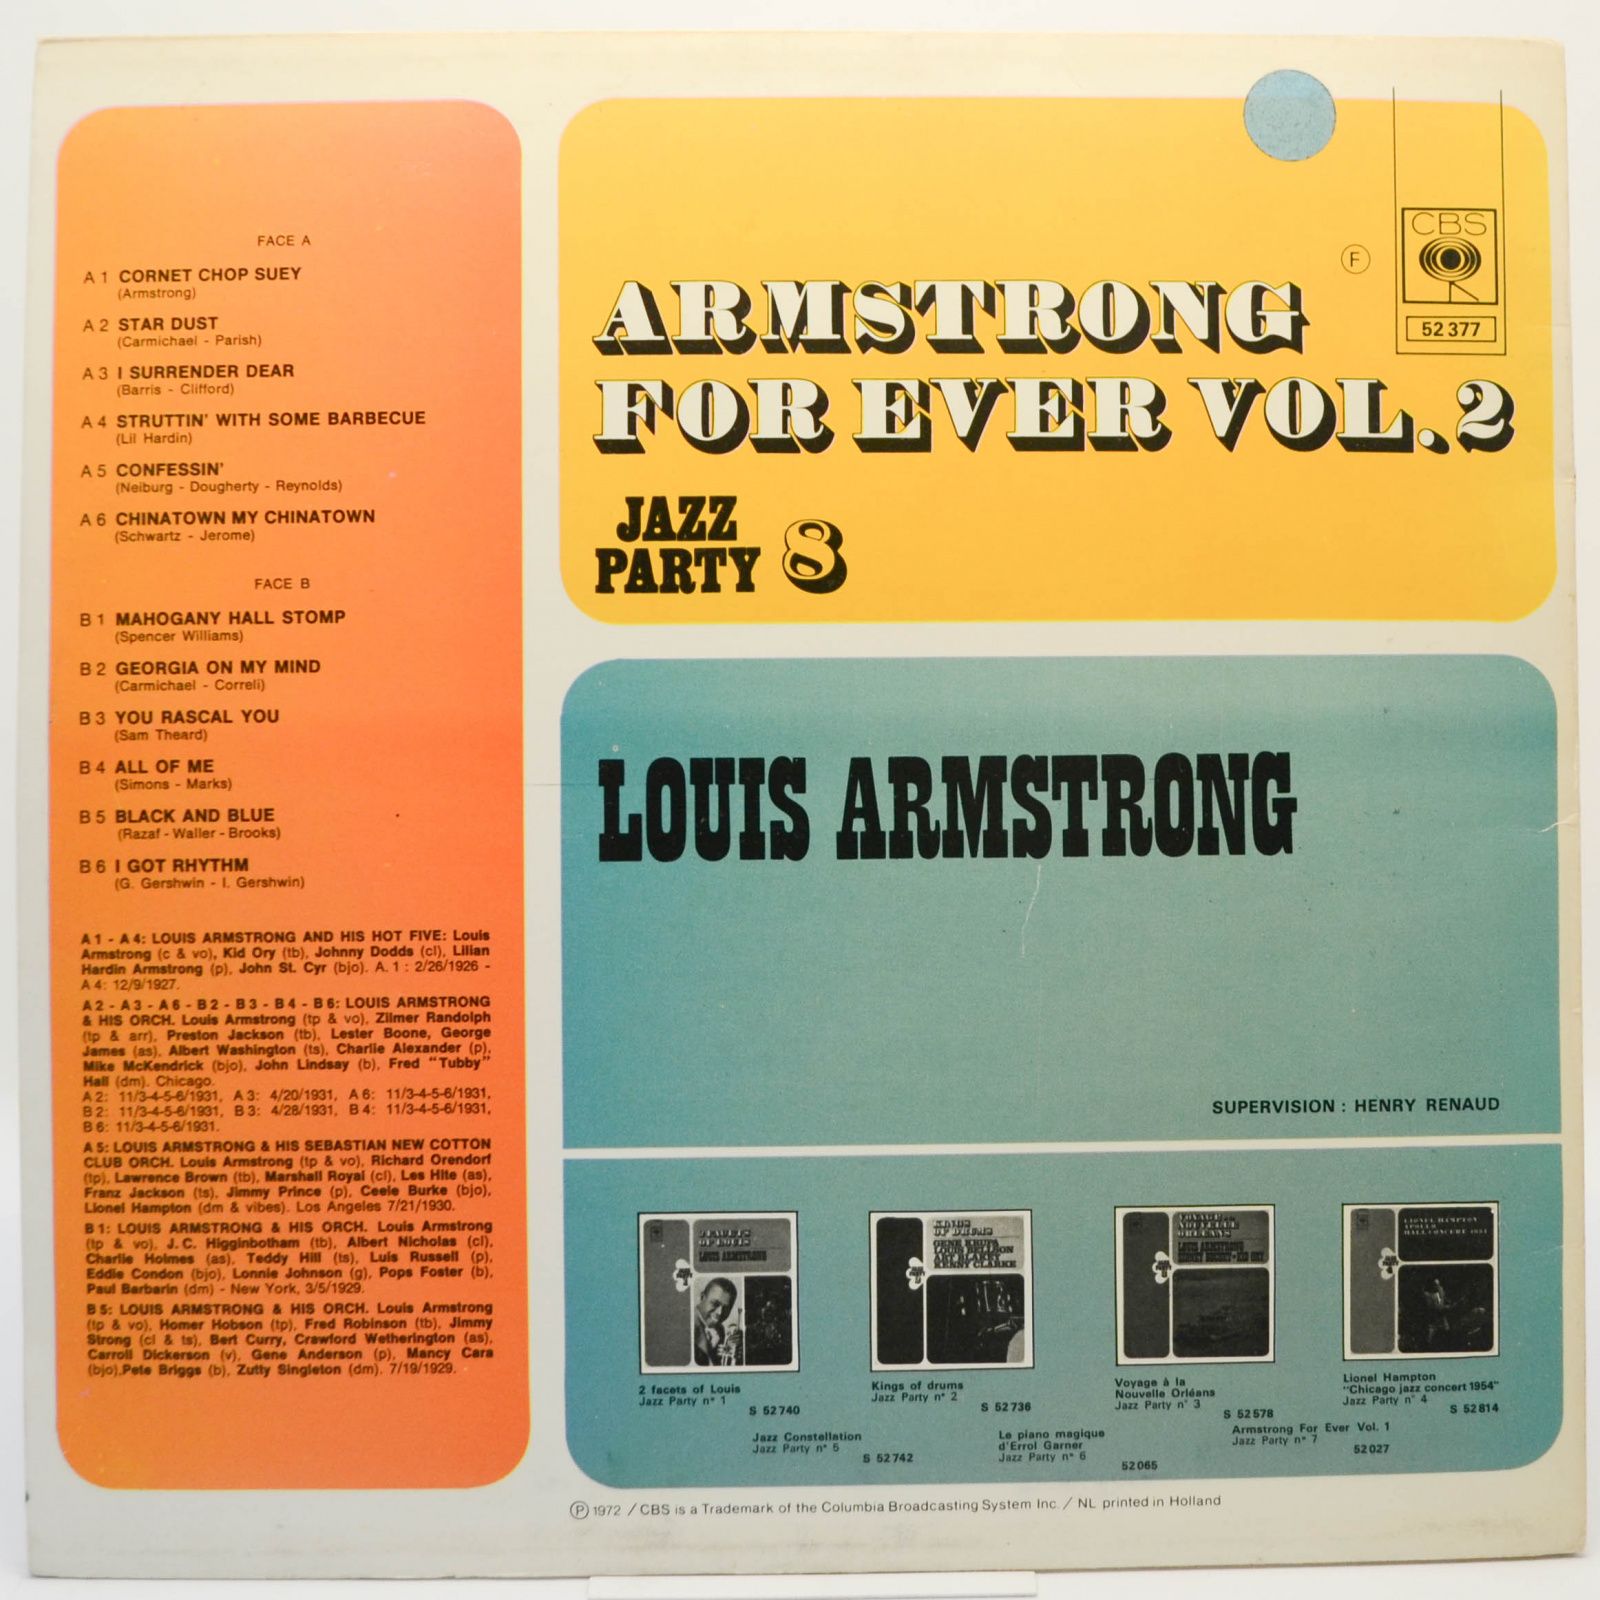 Louis Armstrong — Armstrong For Ever Vol. 2, 1972